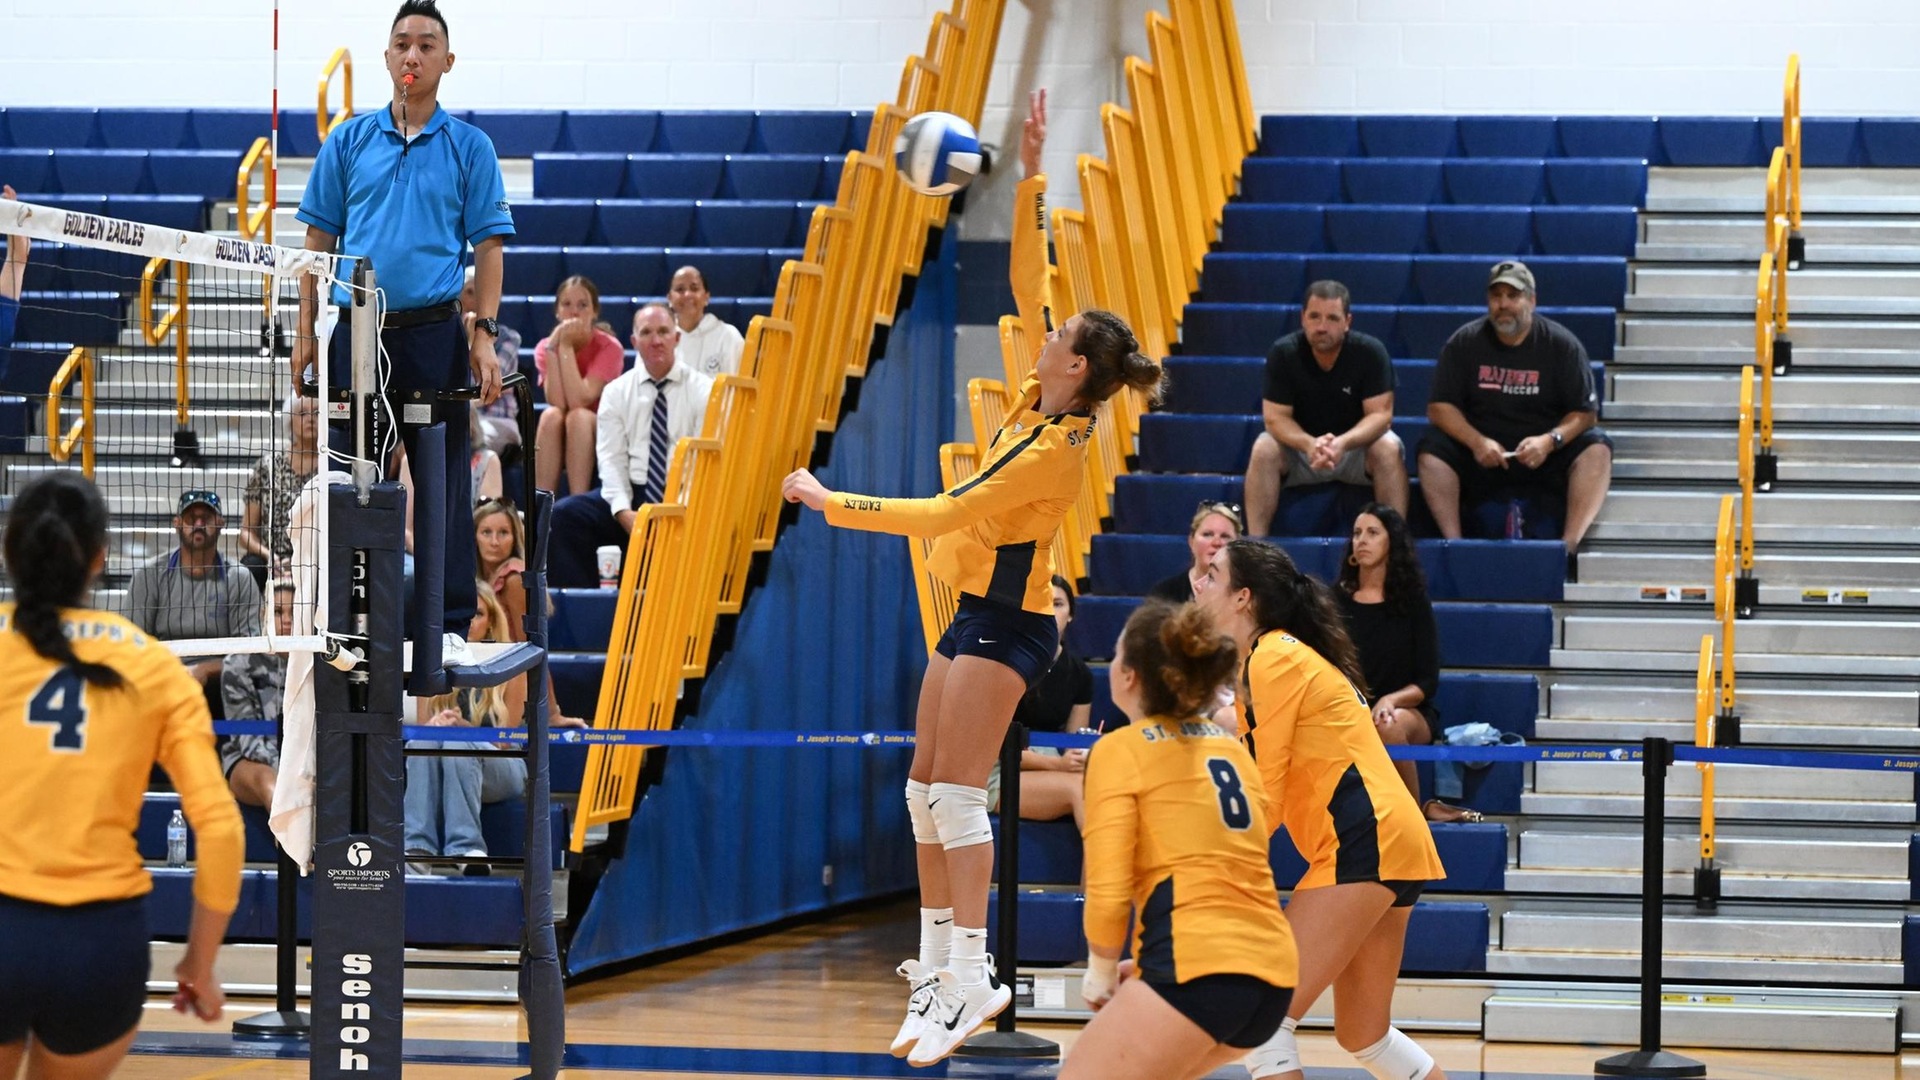 Women's Volleyball Tops Mt. St. Vincent, 3-1